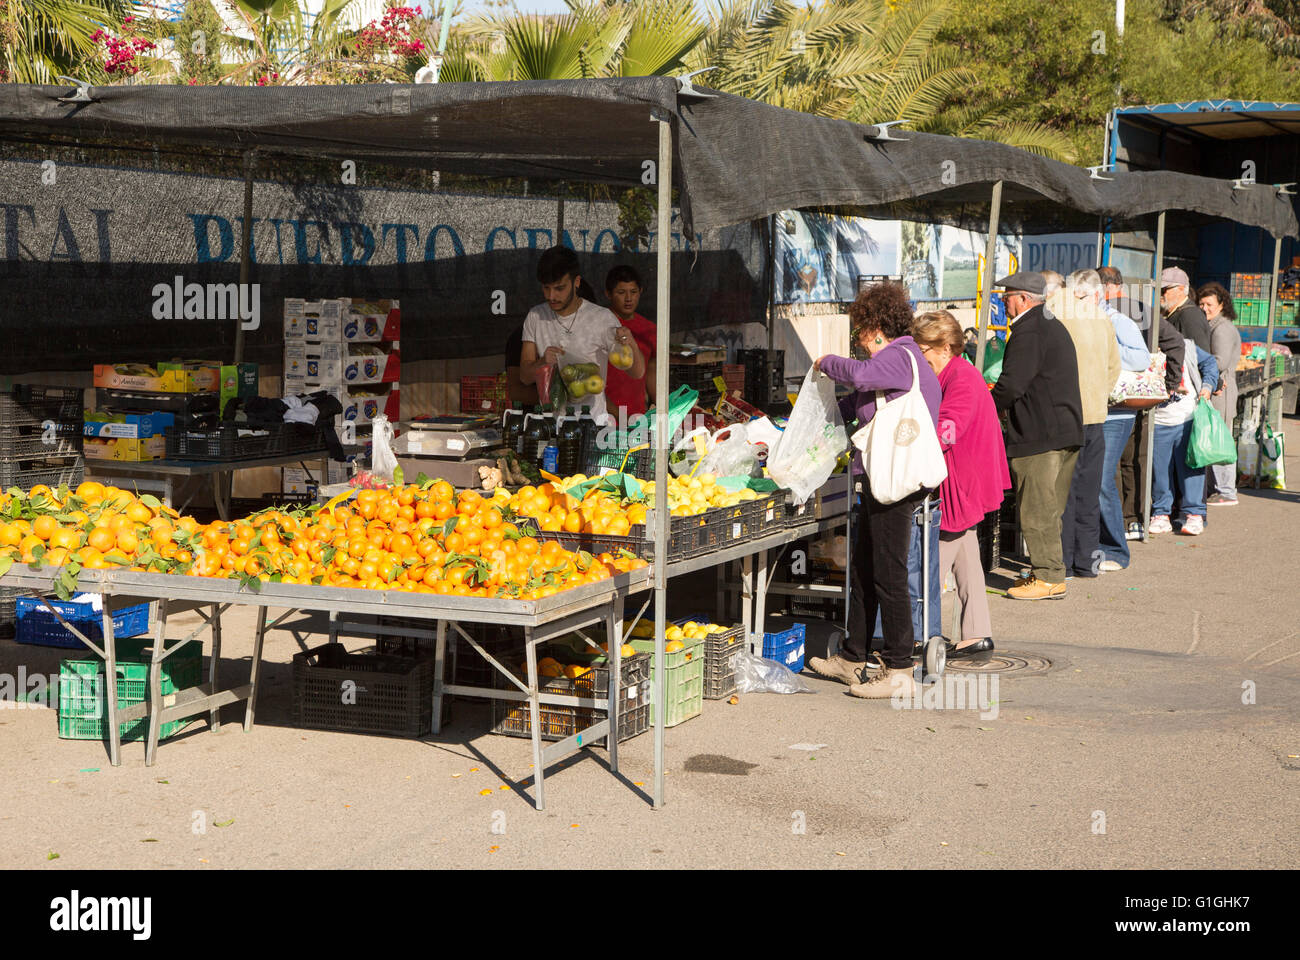 People buying fruit and vegetables at market stall, San Jose, Almeria, Spain Stock Photo